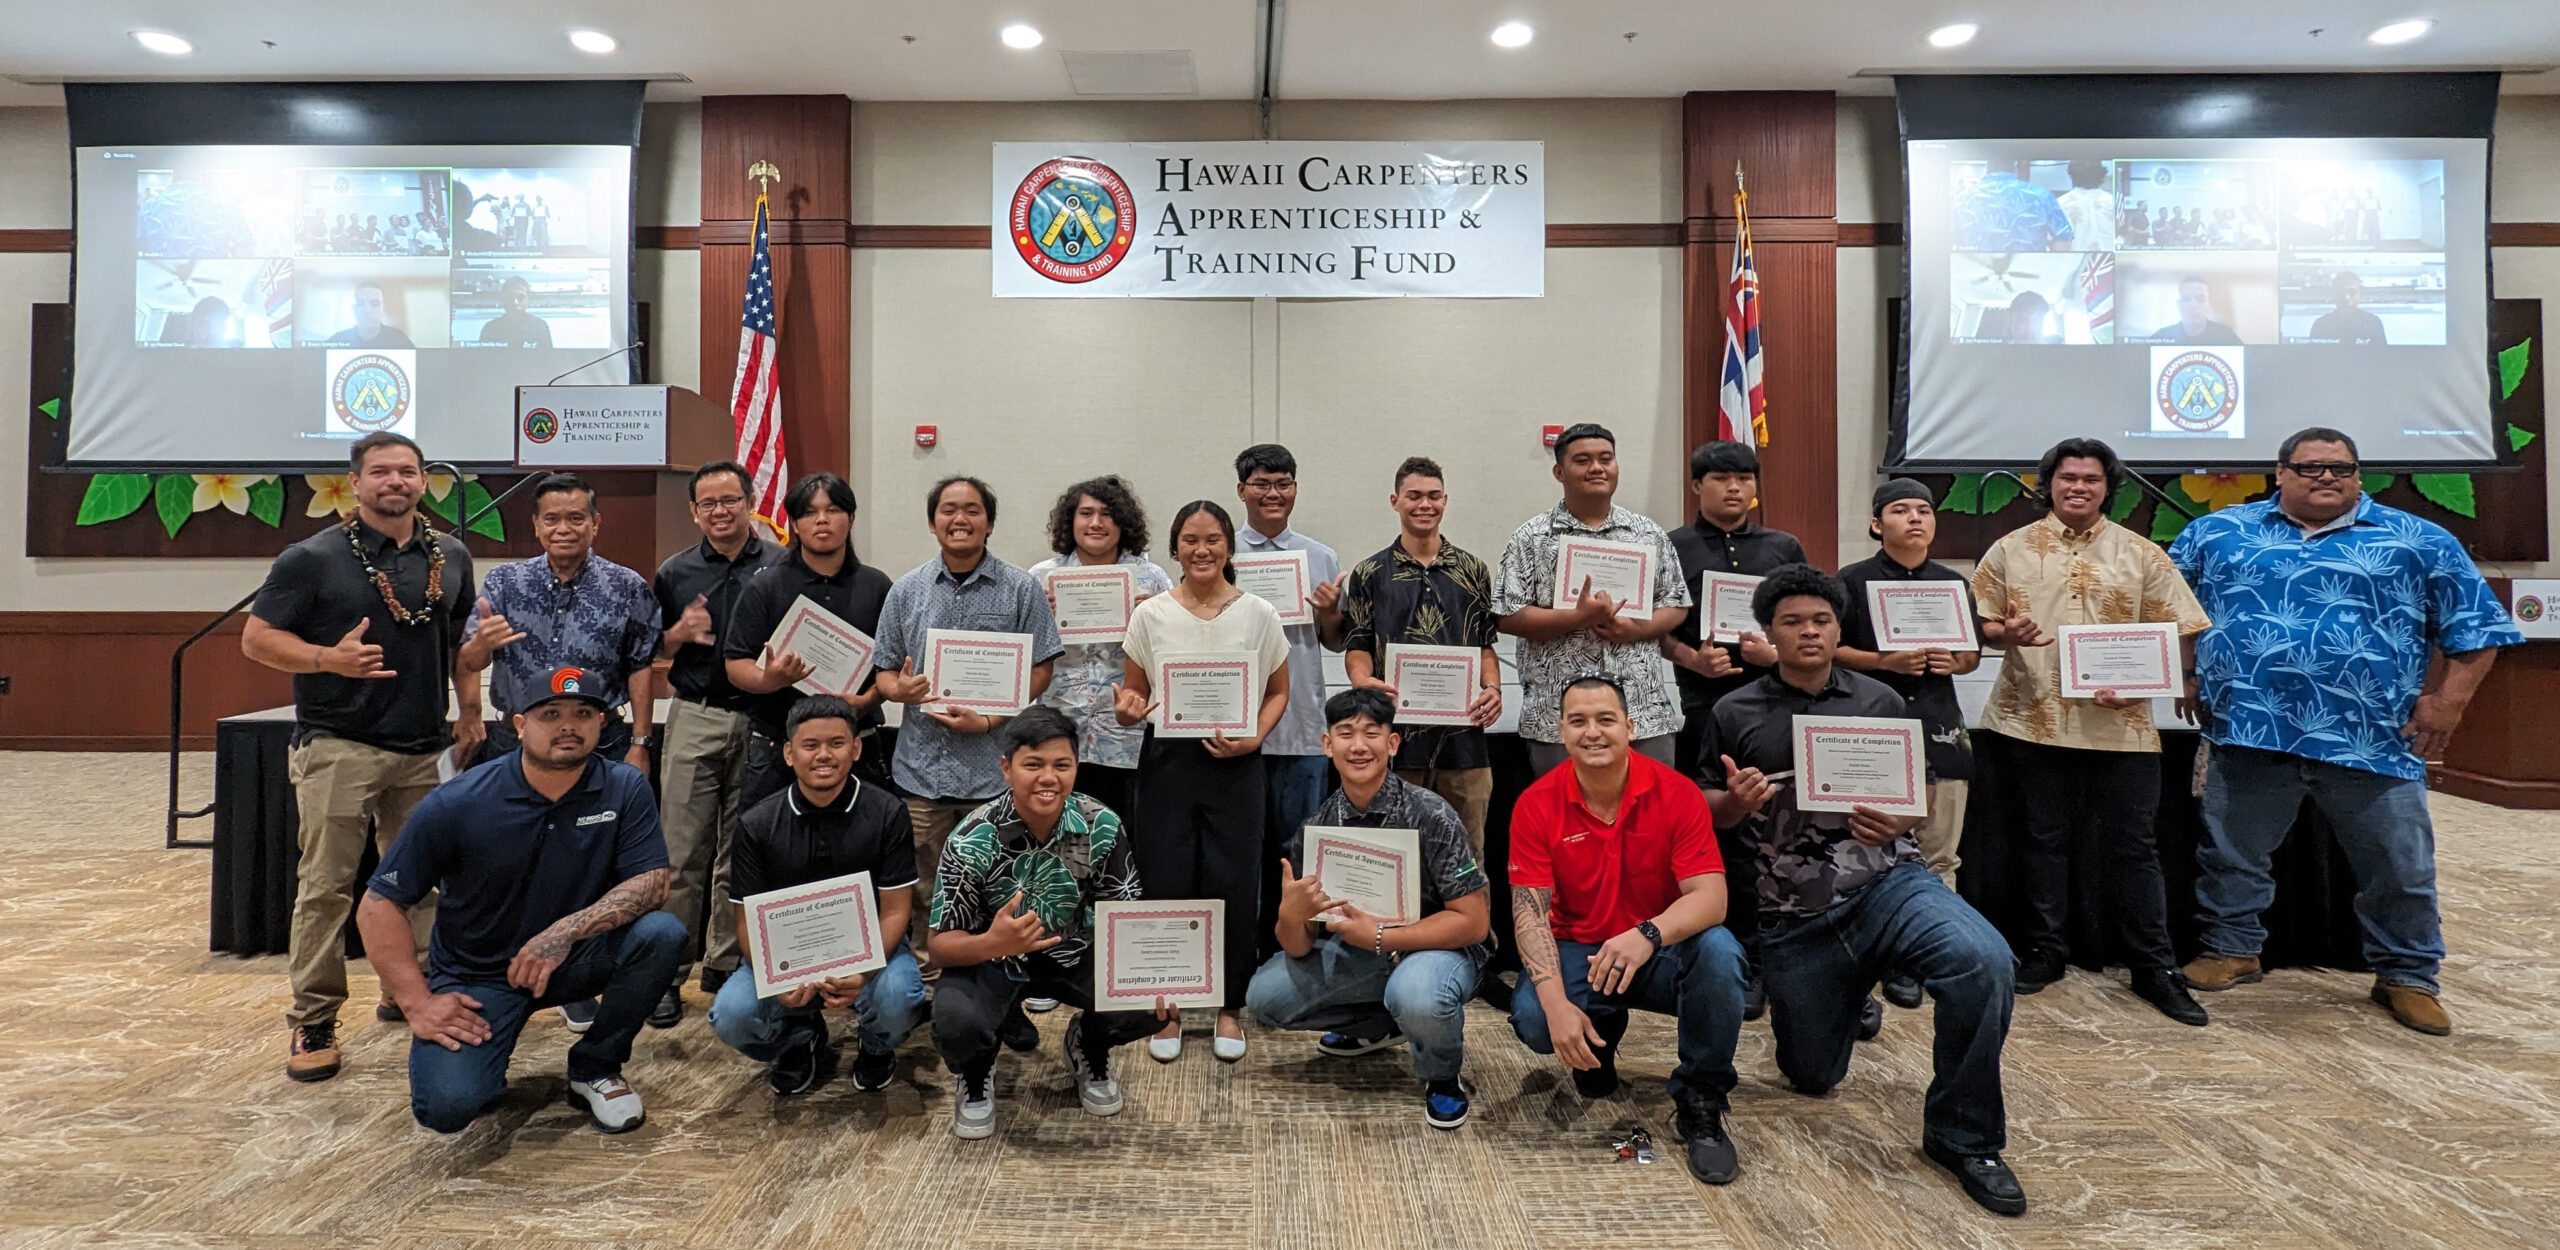 A cohort of summer interns pose inside the HCATF ballroom with their certificates ad instructors after their recognition ceremony.